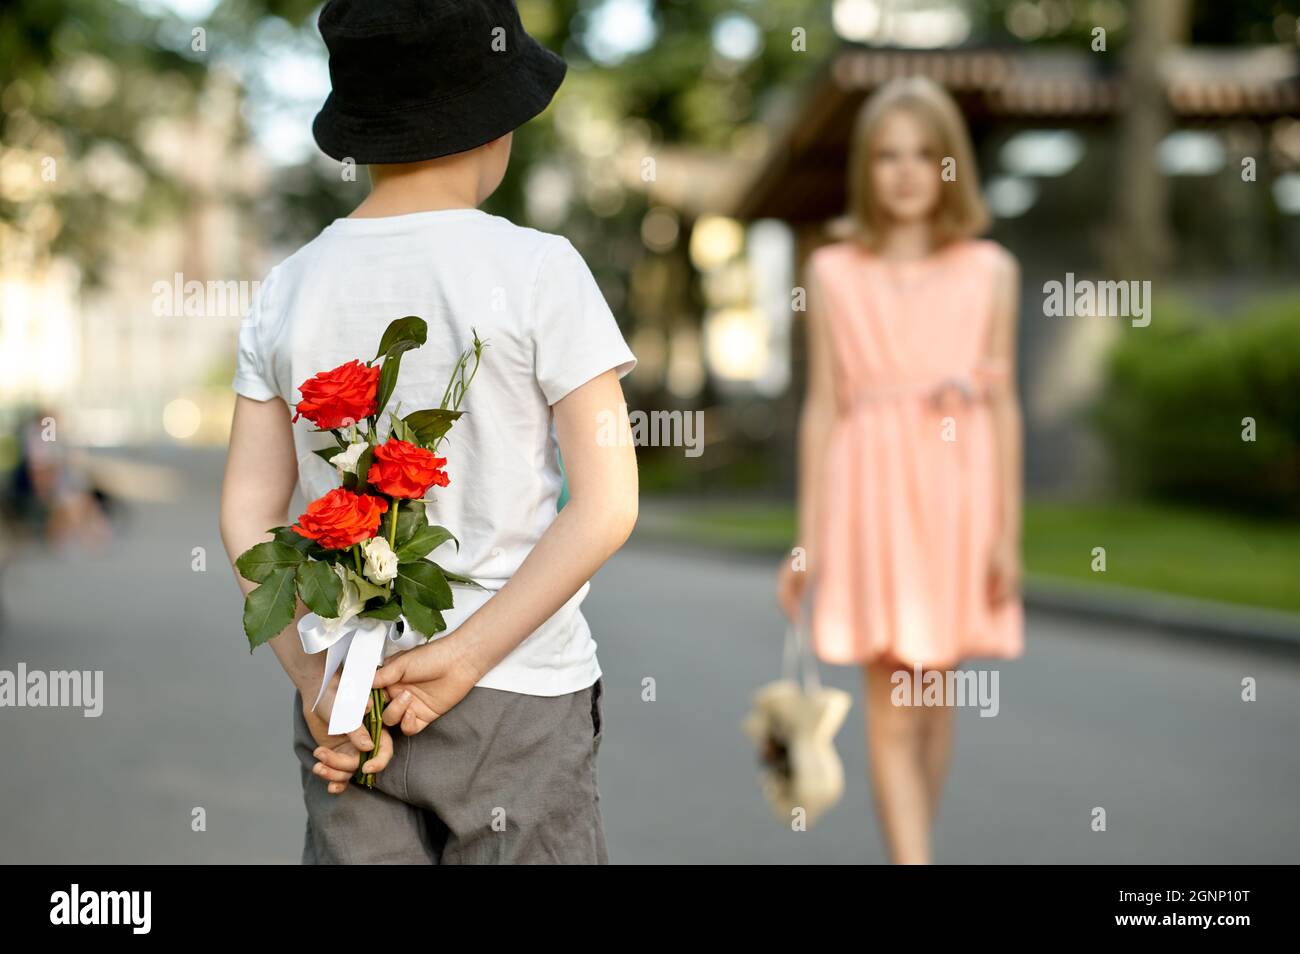 Children's date, boy hides flowers from a girl Stock Photo